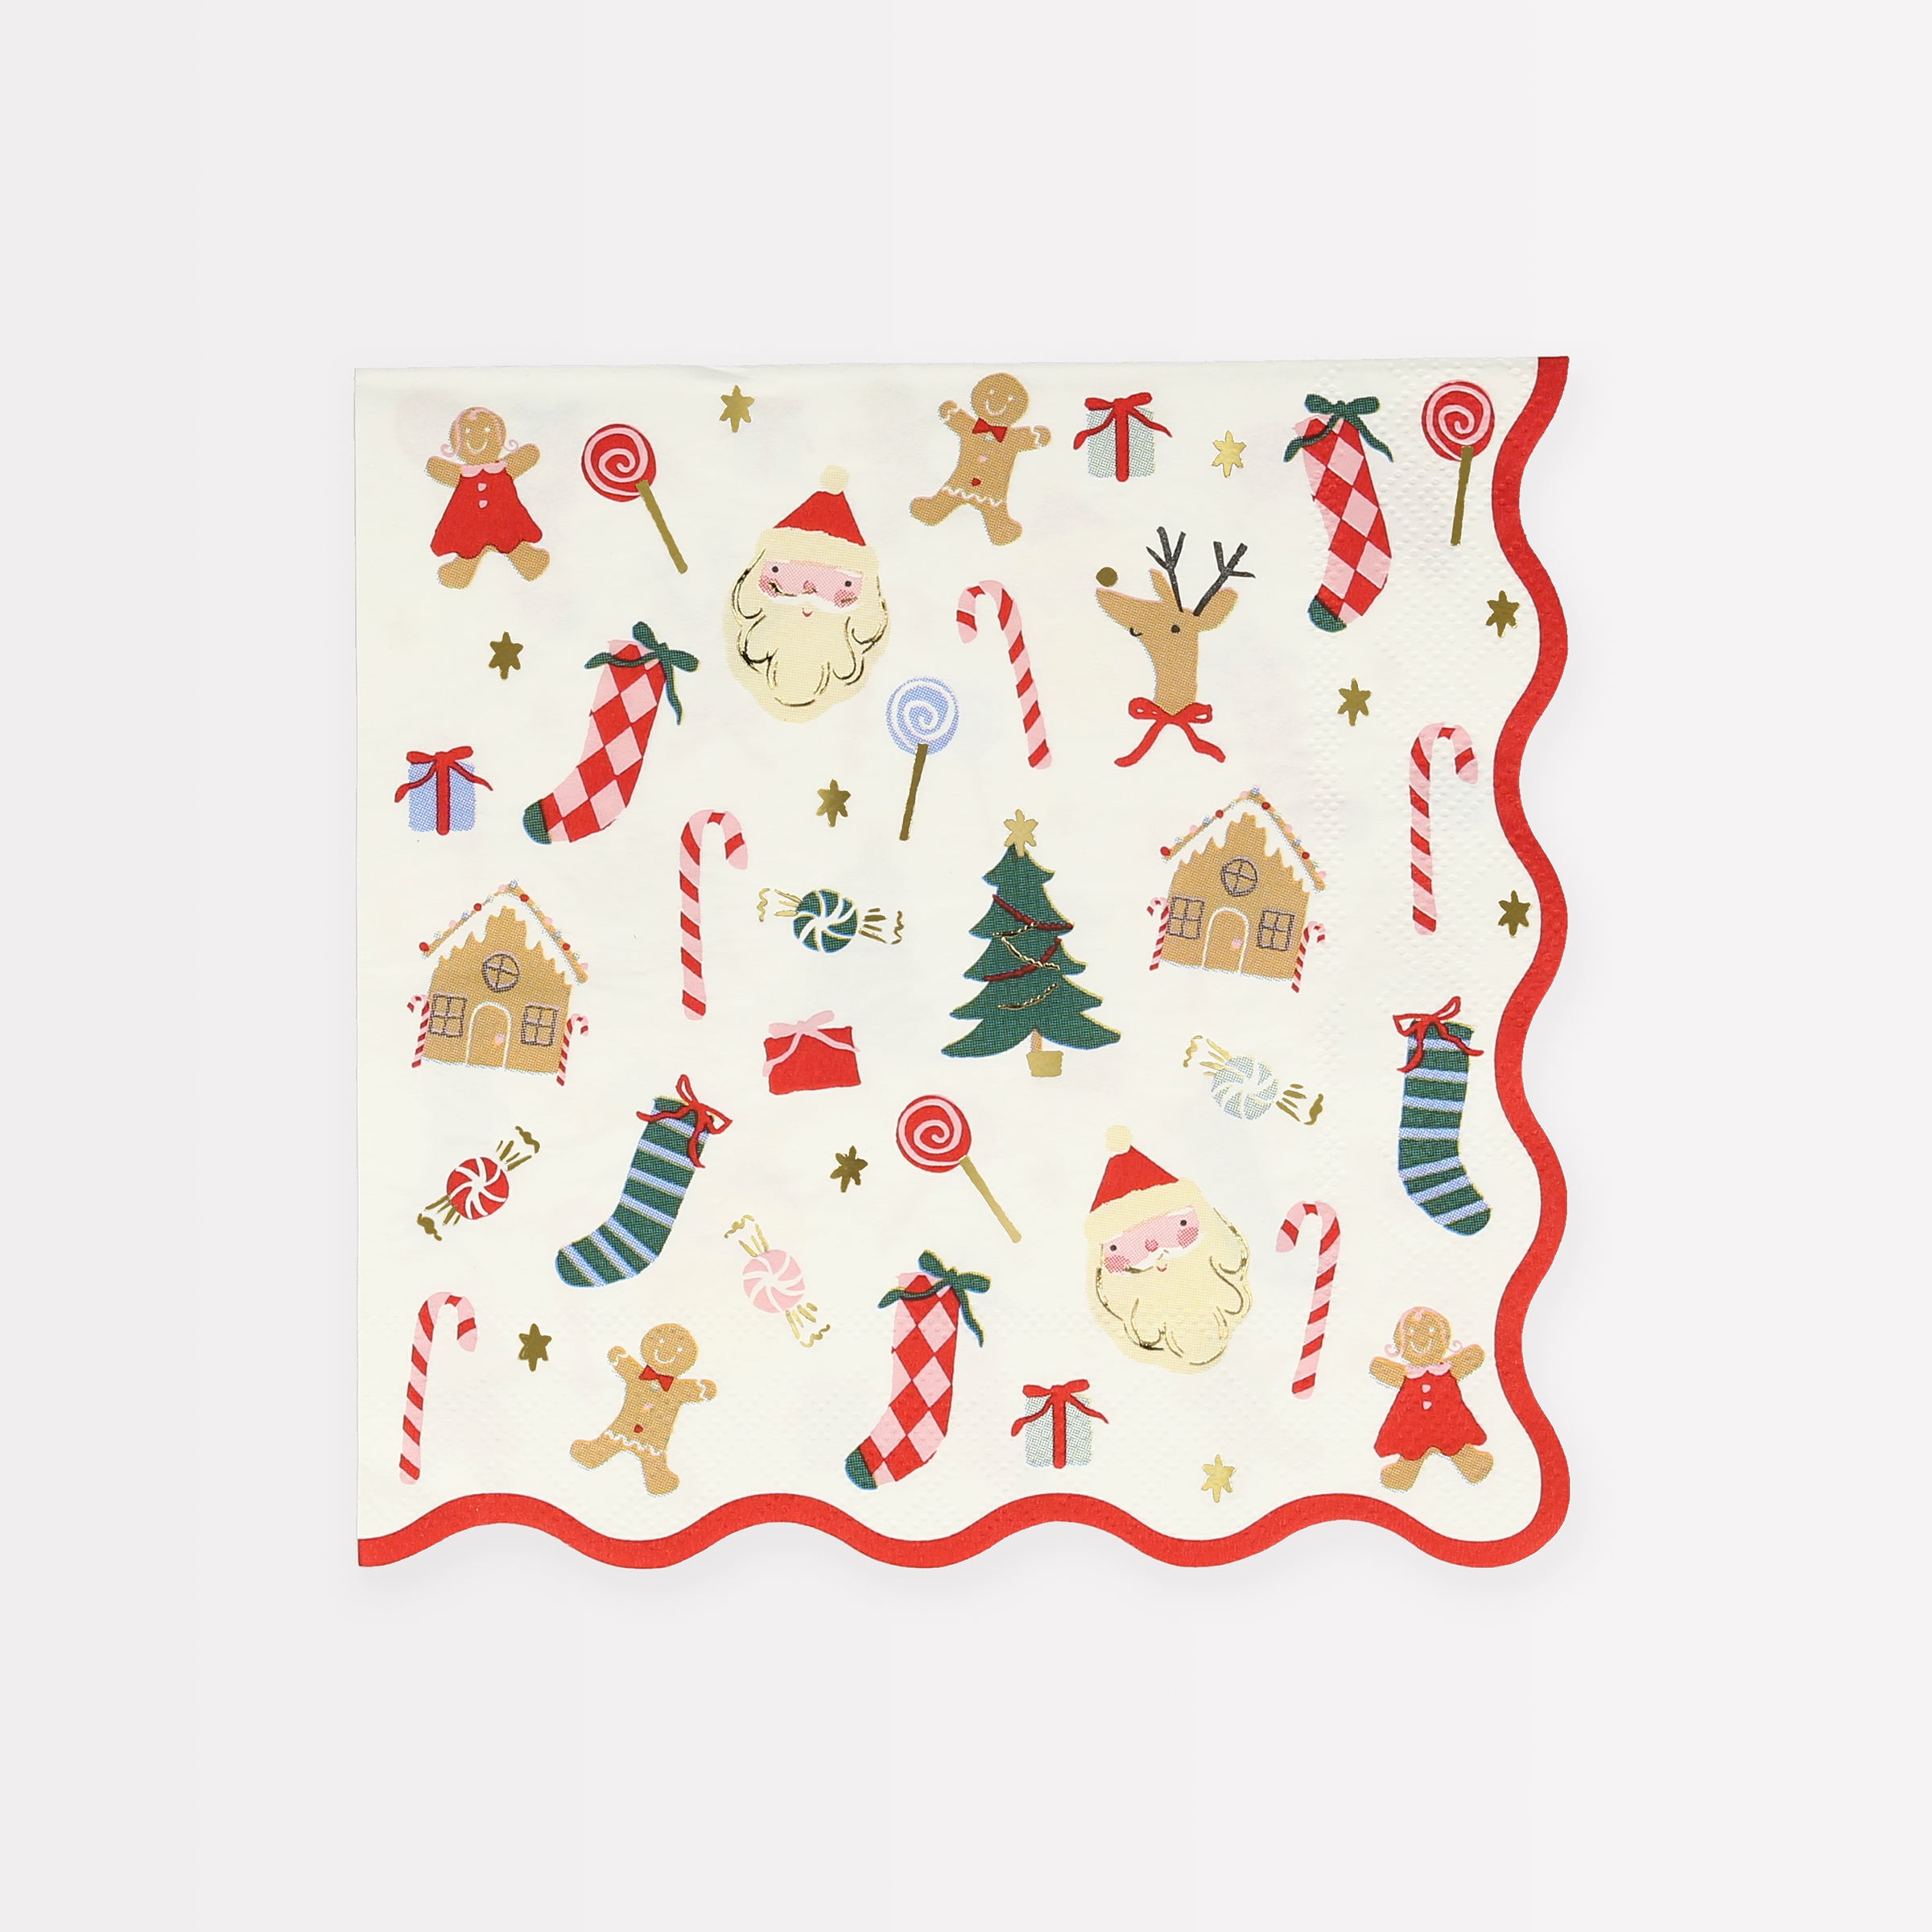 Our large paper napkins, with jolly designs, are great as Christmas table decorations.